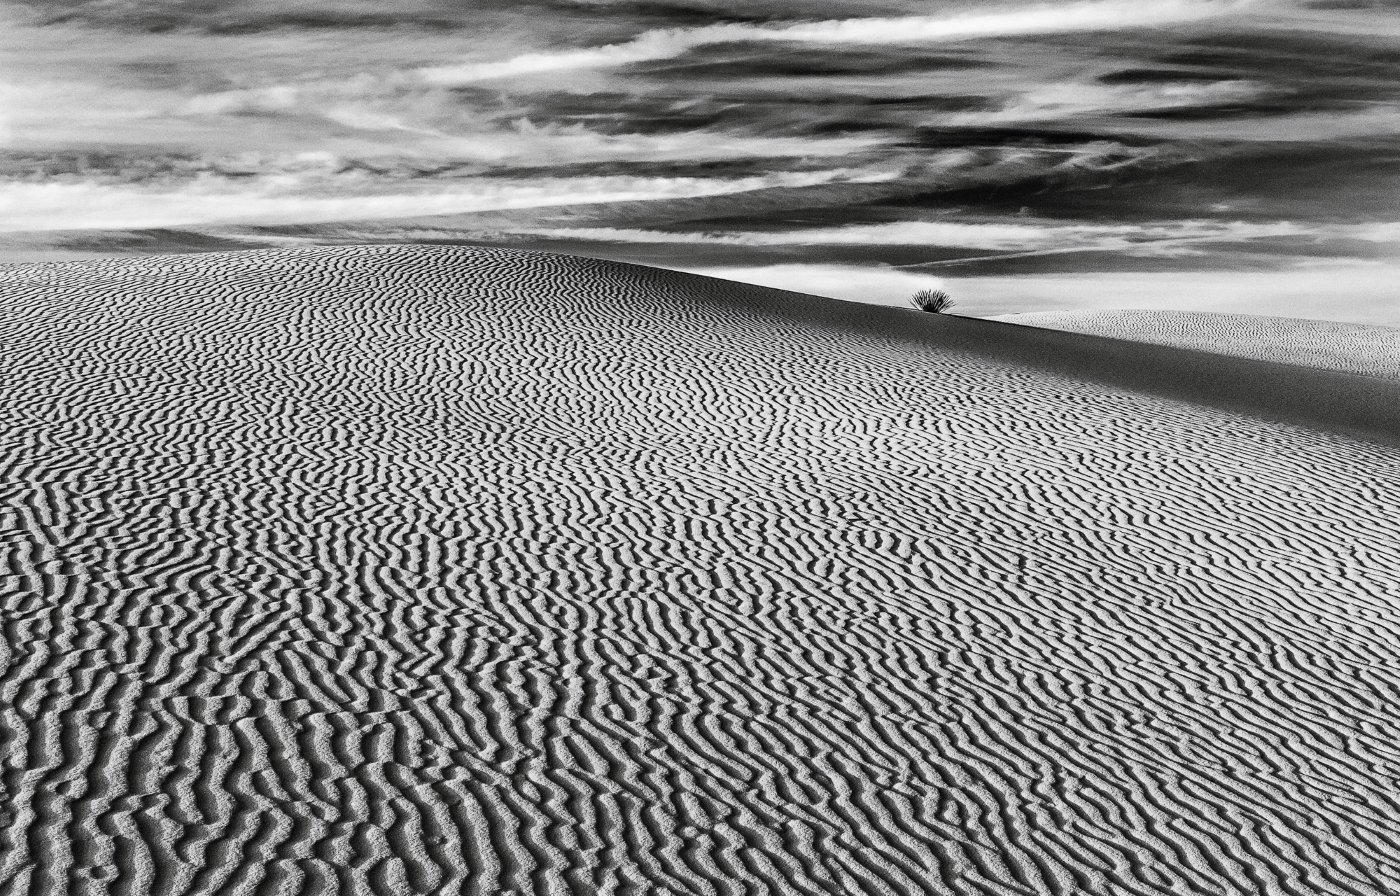 White Sands Minimilism,	Ron Varley,Heard Nature Photography Club,2nd Place	